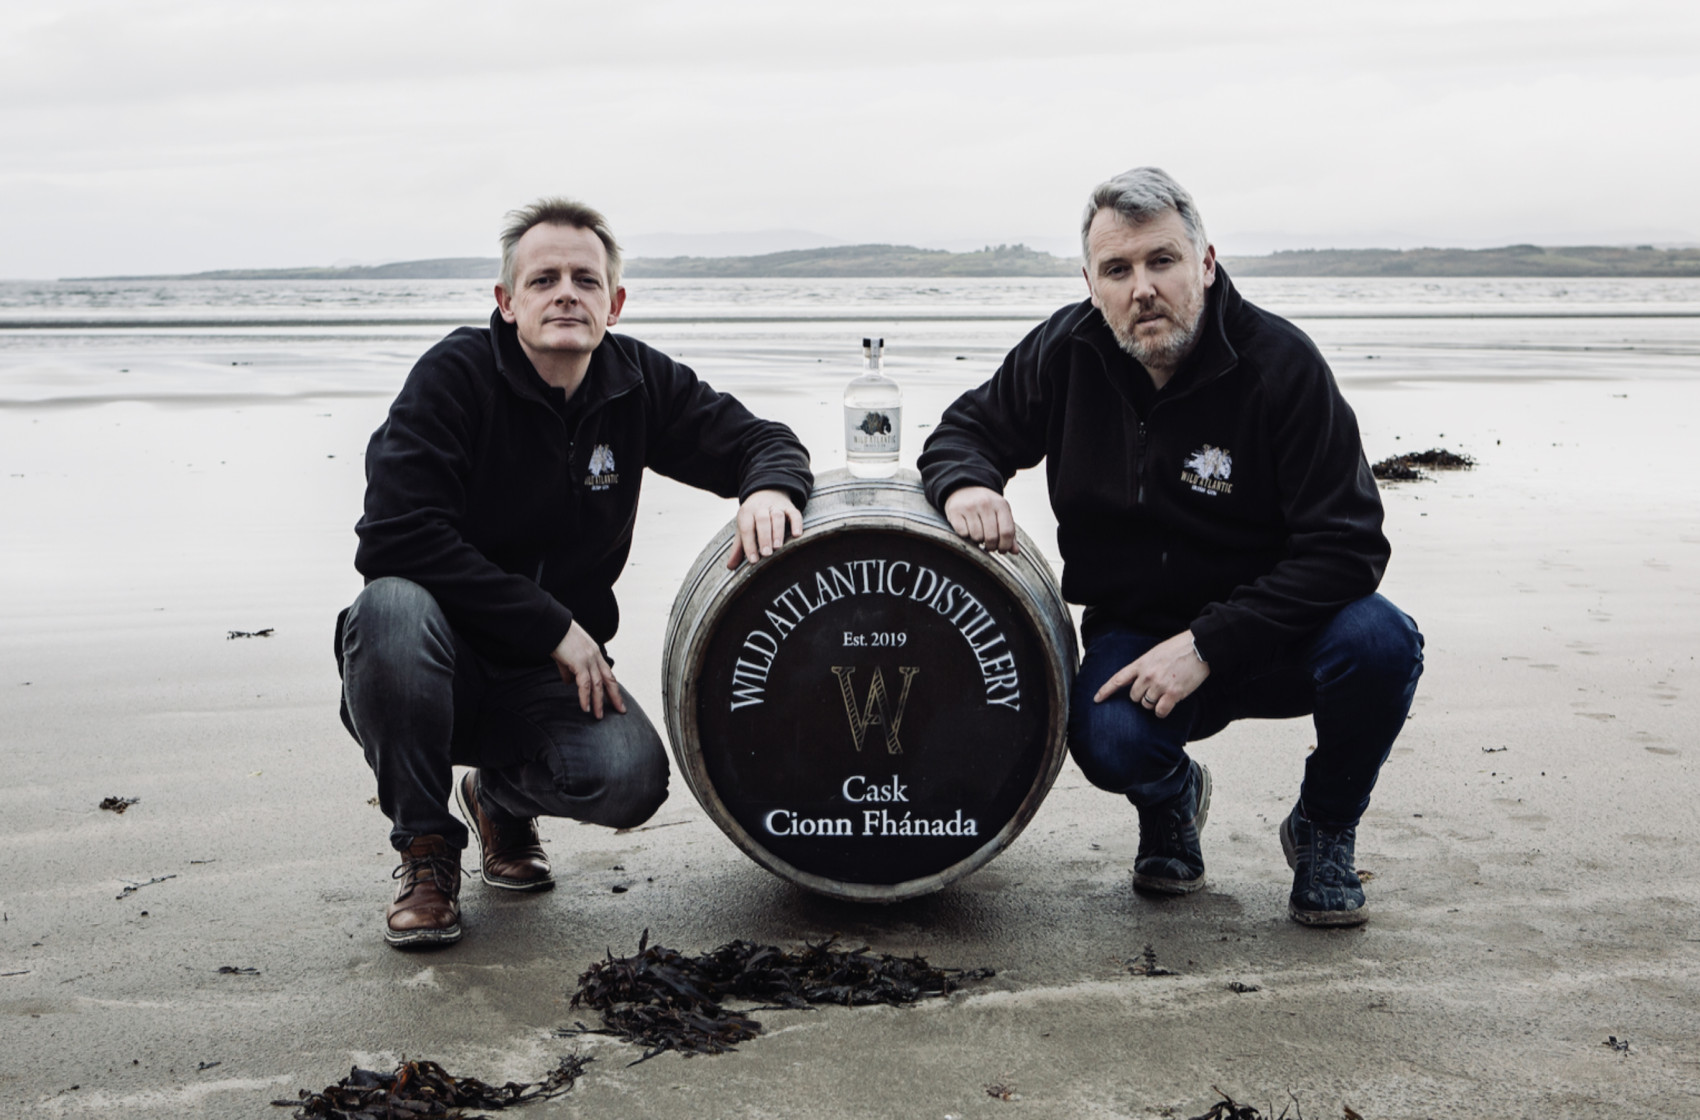 Brian and Jim the founders of Wild Atlantic Distillery